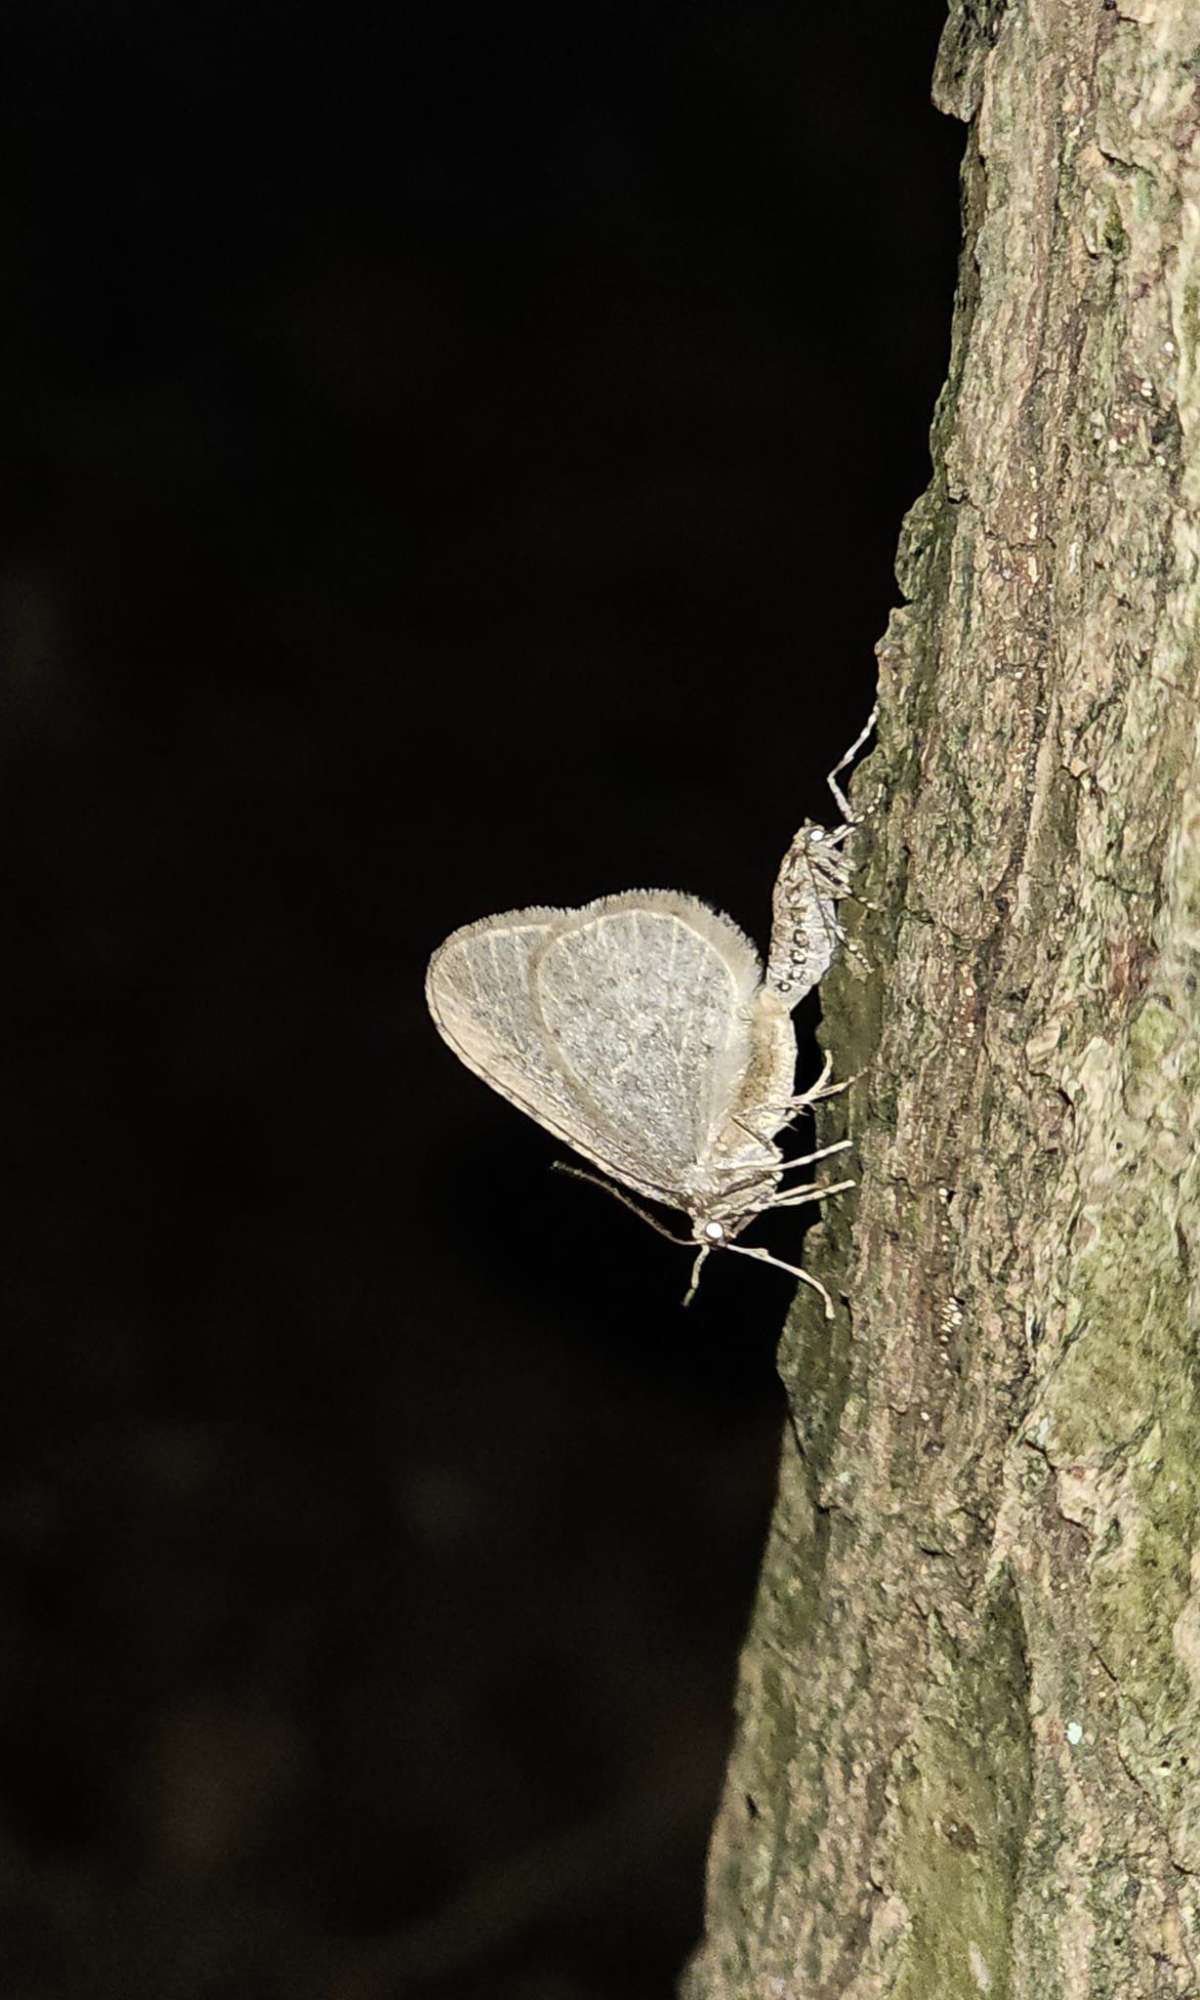 Winter Moth (Operophtera brumata) photographed in Kent by Len Cooper